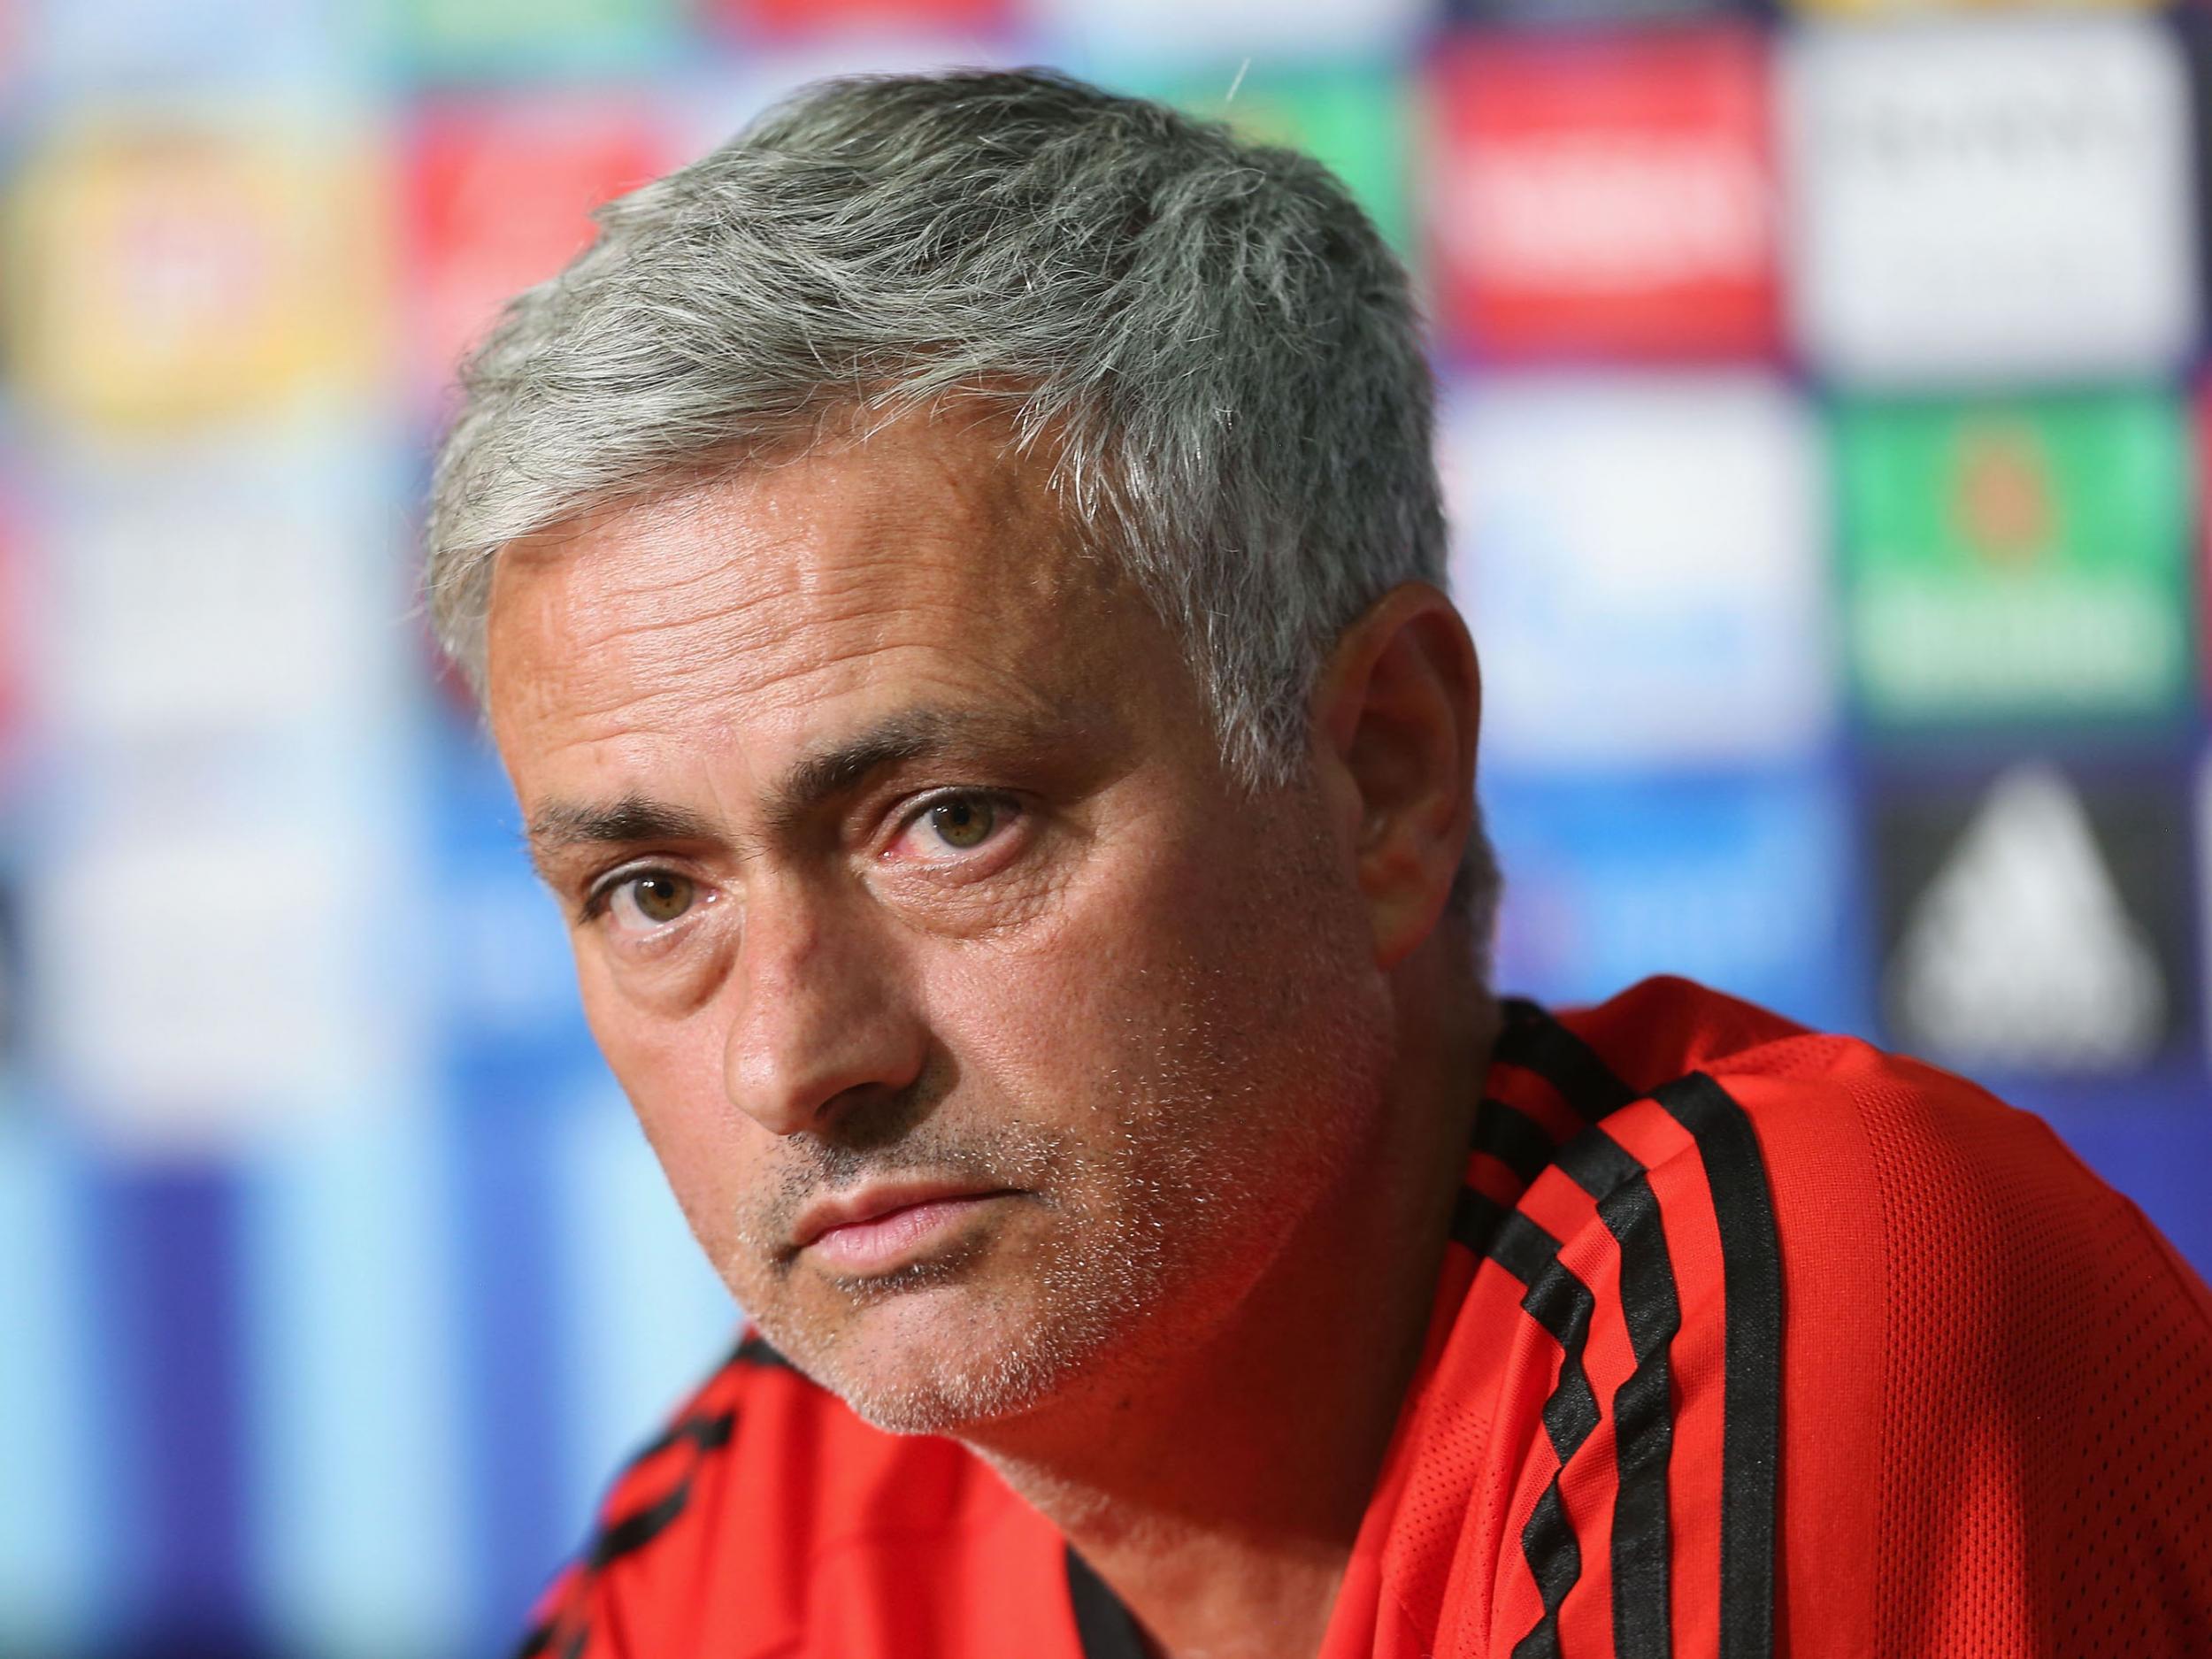 Manchester United could face Jose Mourinho's former side Real Madrid in the Champions League group stages